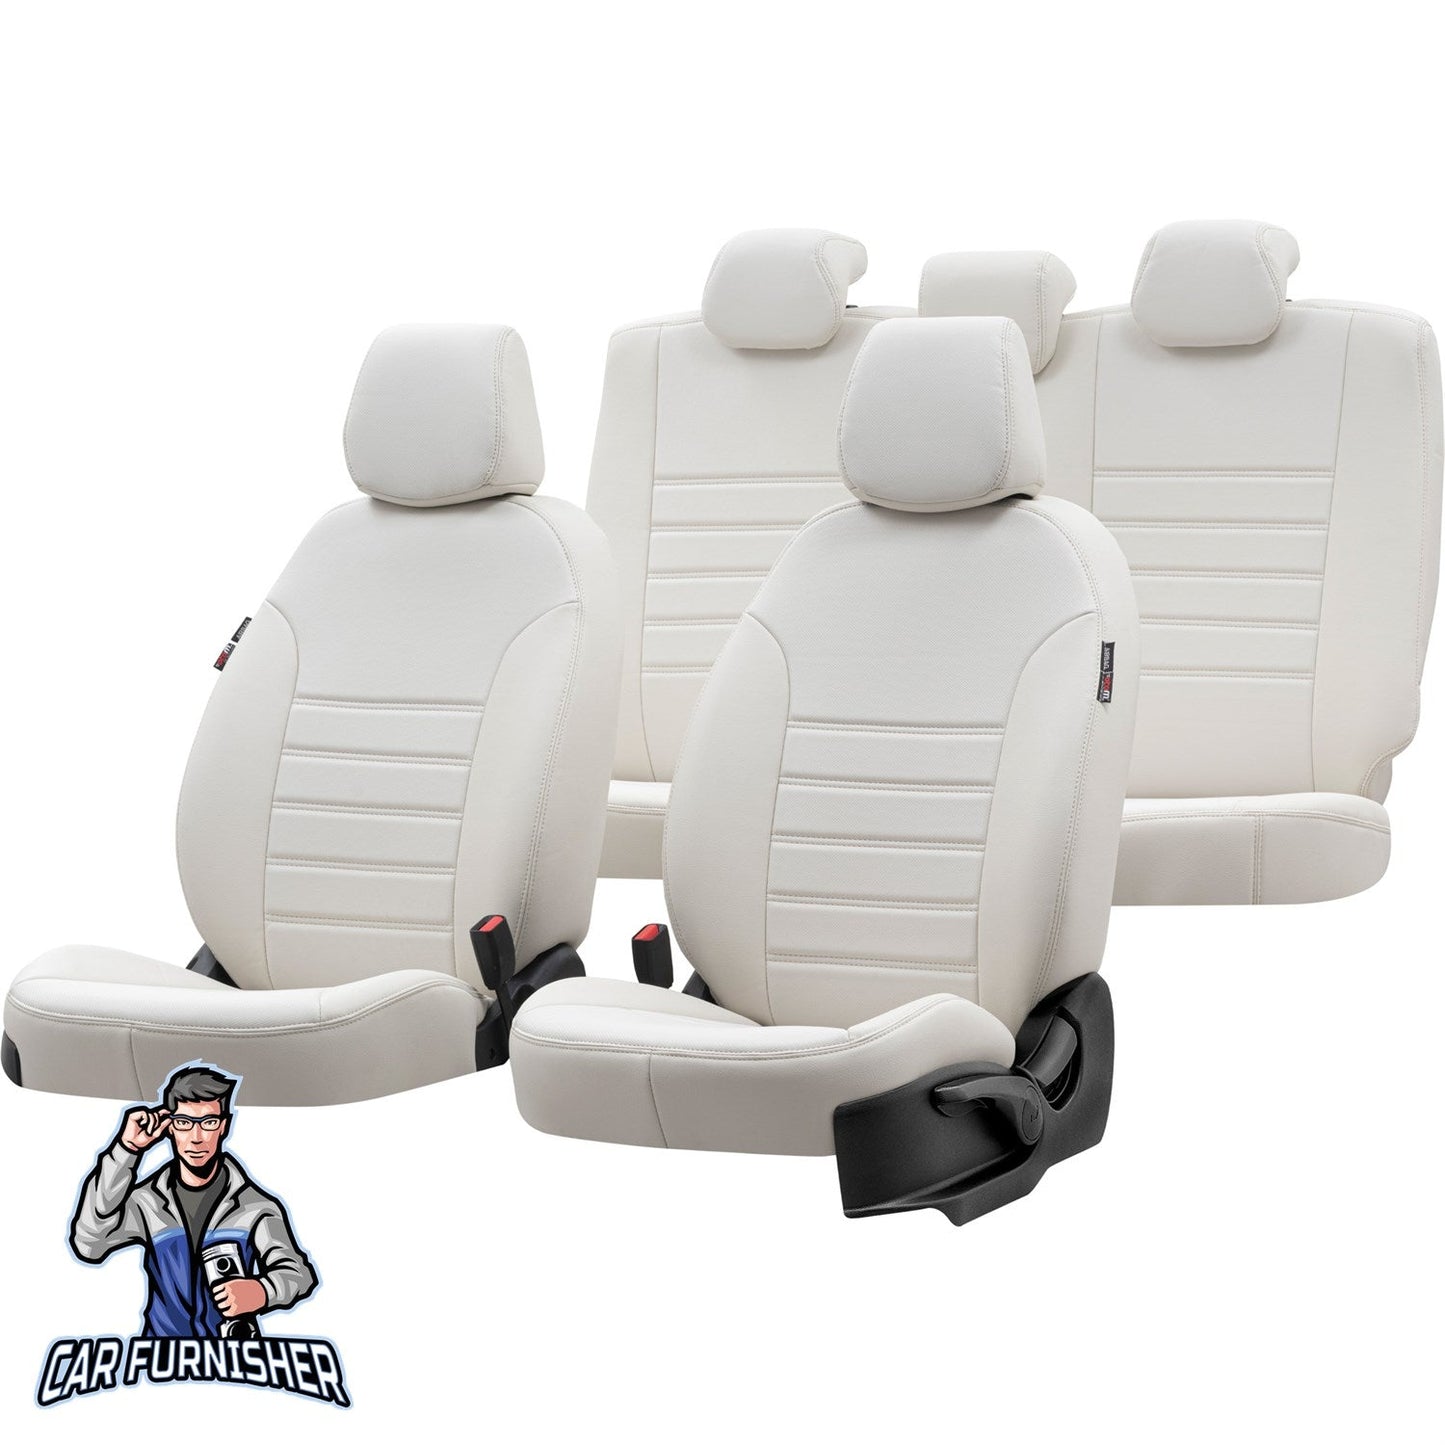 Toyota Corolla Seat Cover Istanbul Leather Design Ivory Leather